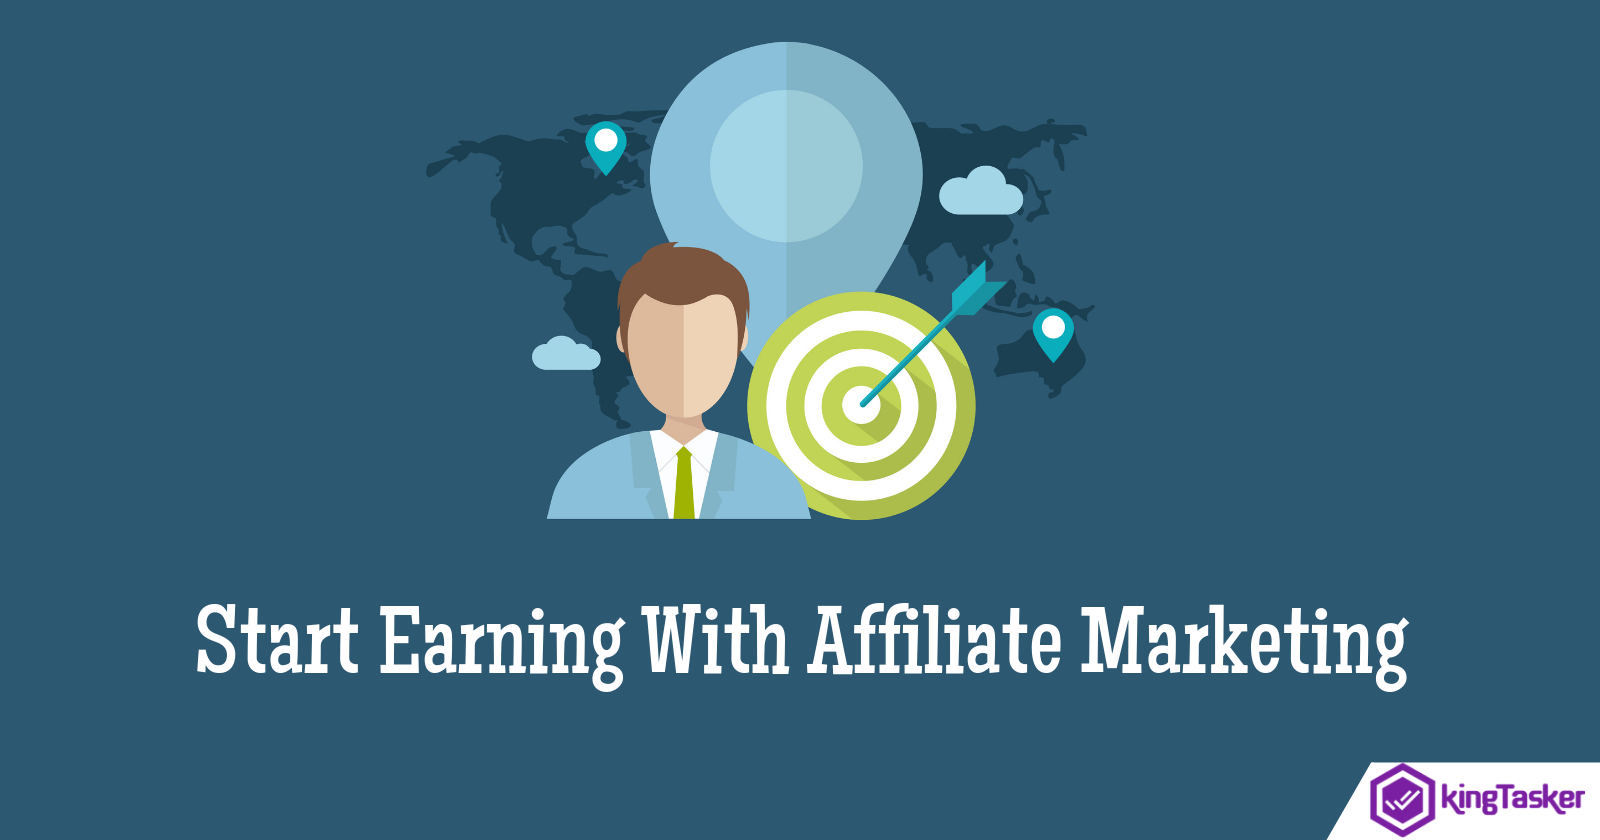 How To Start Affiliate Marketing